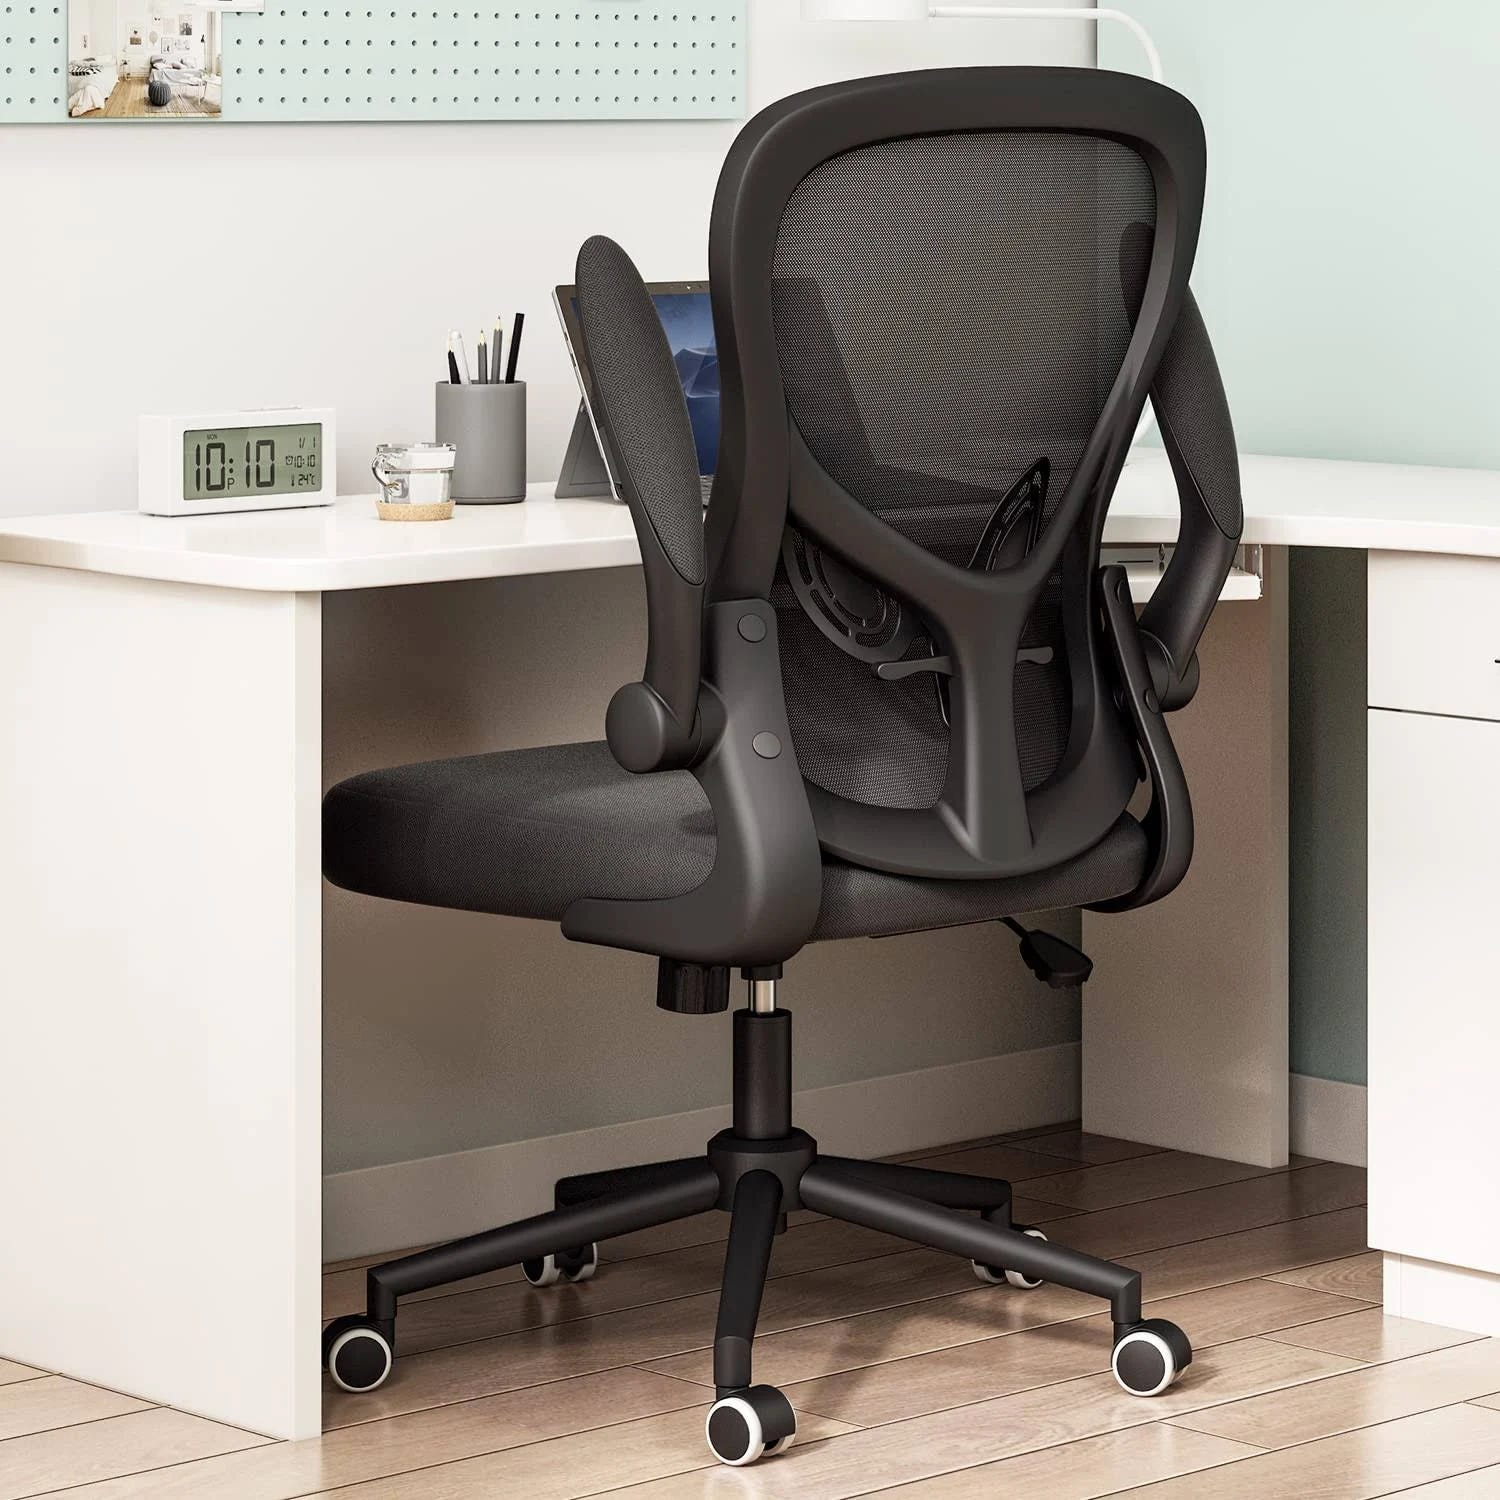 Stylish Ergonomic Rocking Office Chair - Adjustable Height and Tilt Lever | Image